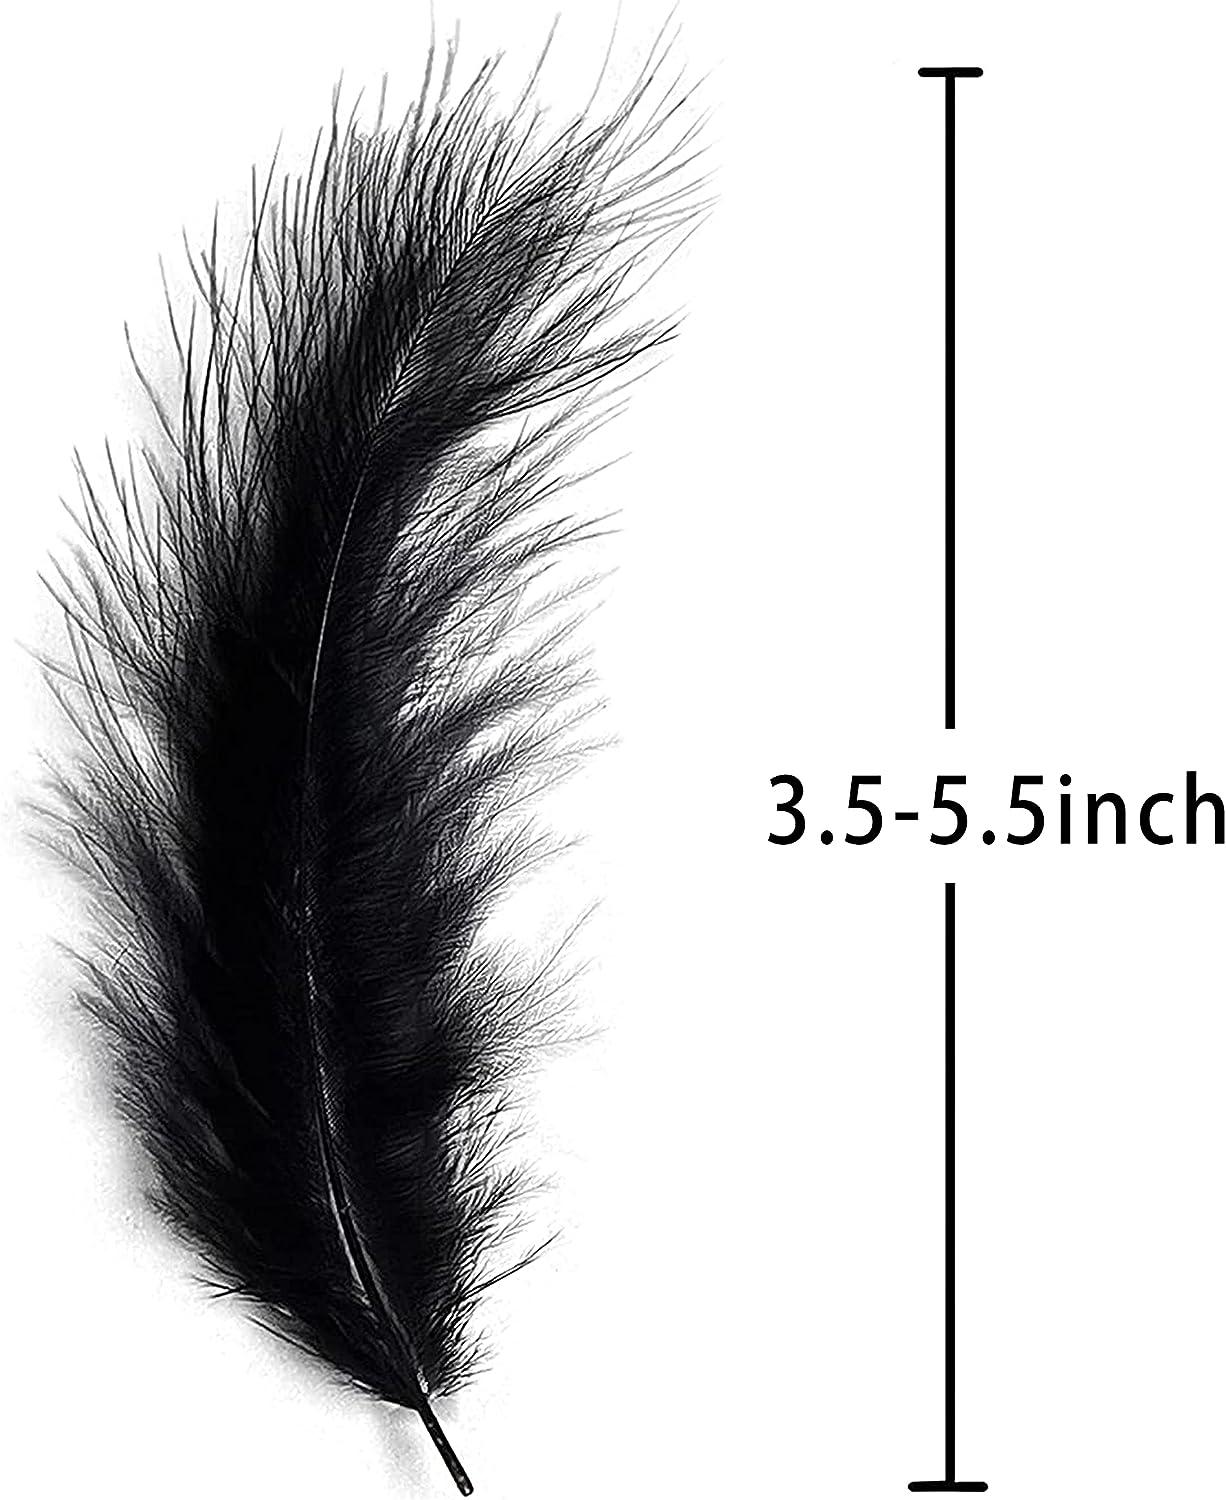 100pcs 4-6 Black Feathers for Crafts and Dreamcatcher Making Fringe Trim  and DIY Projects Colored Feathers Material black 100Pcs